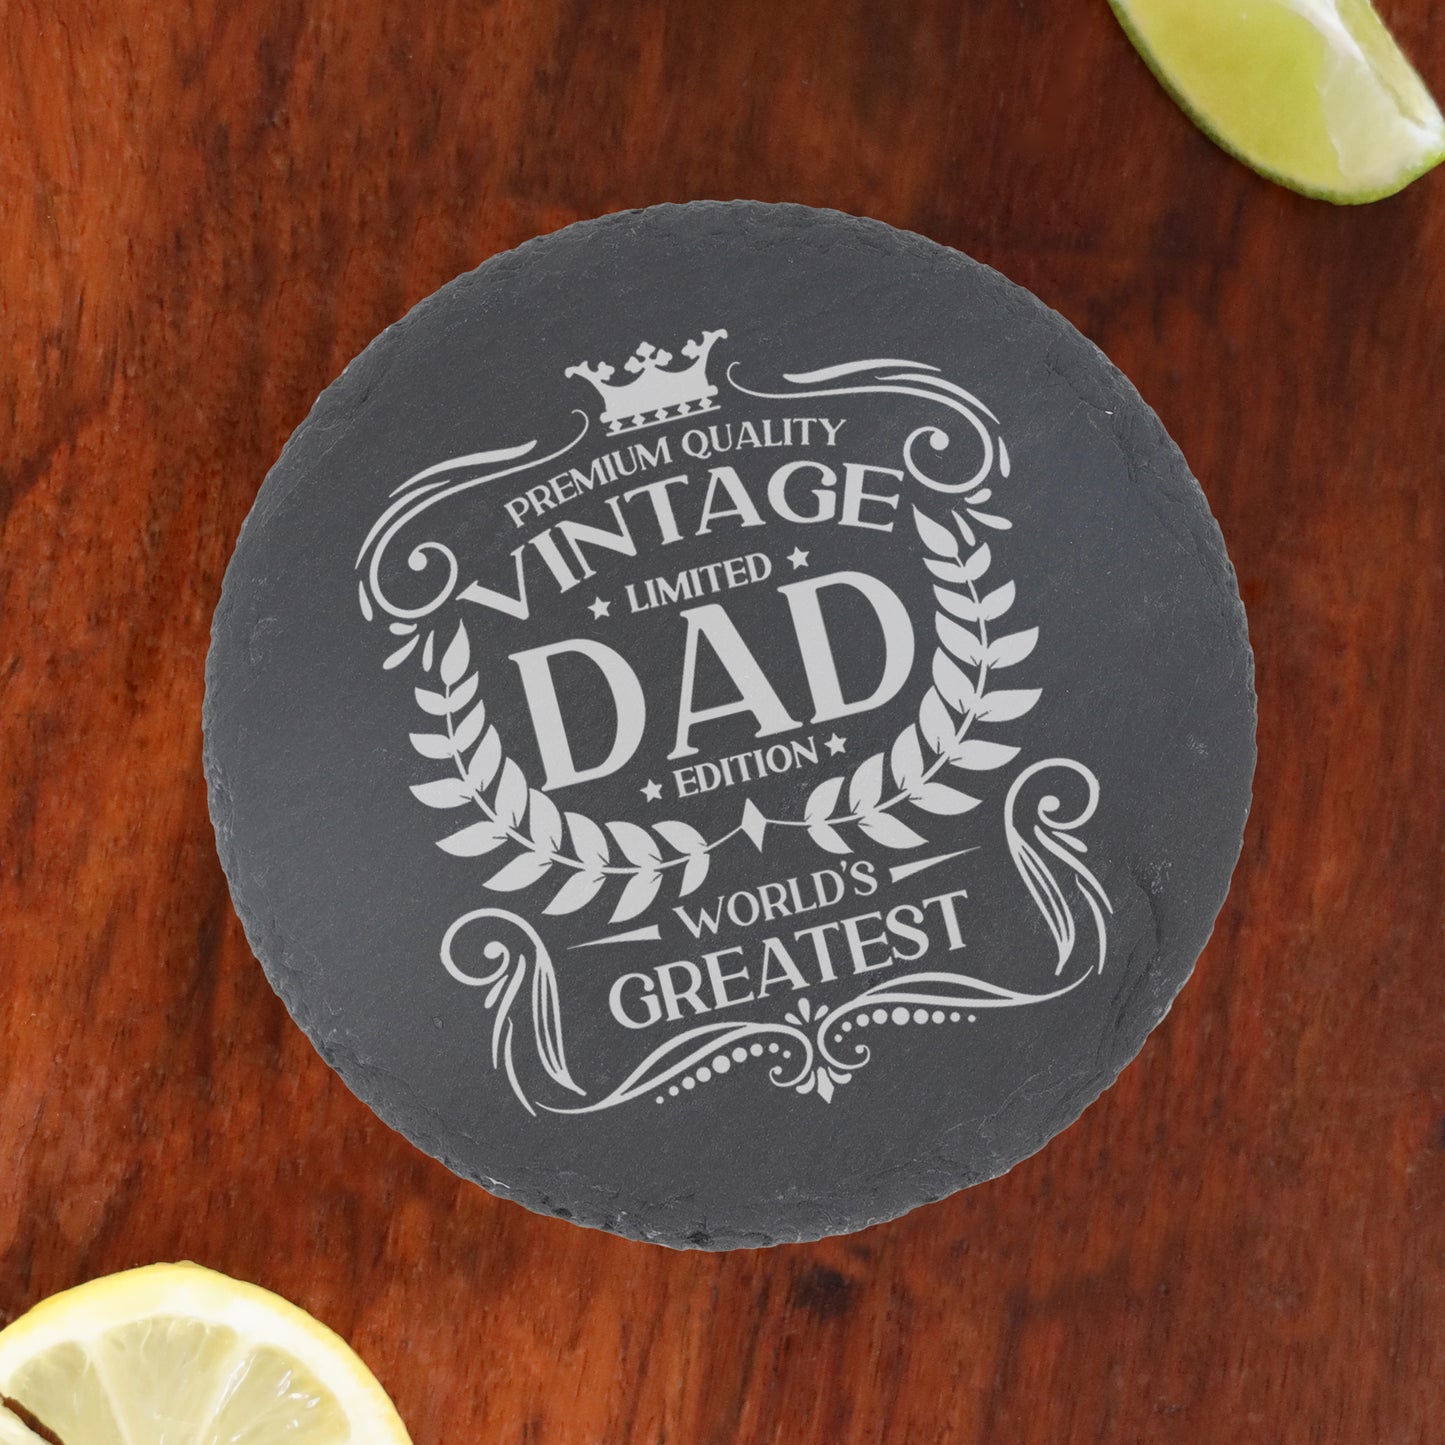 Vintage Worlds Greatest Dad Mug and/or Coaster  - Always Looking Good - Round Coaster On Its Own  